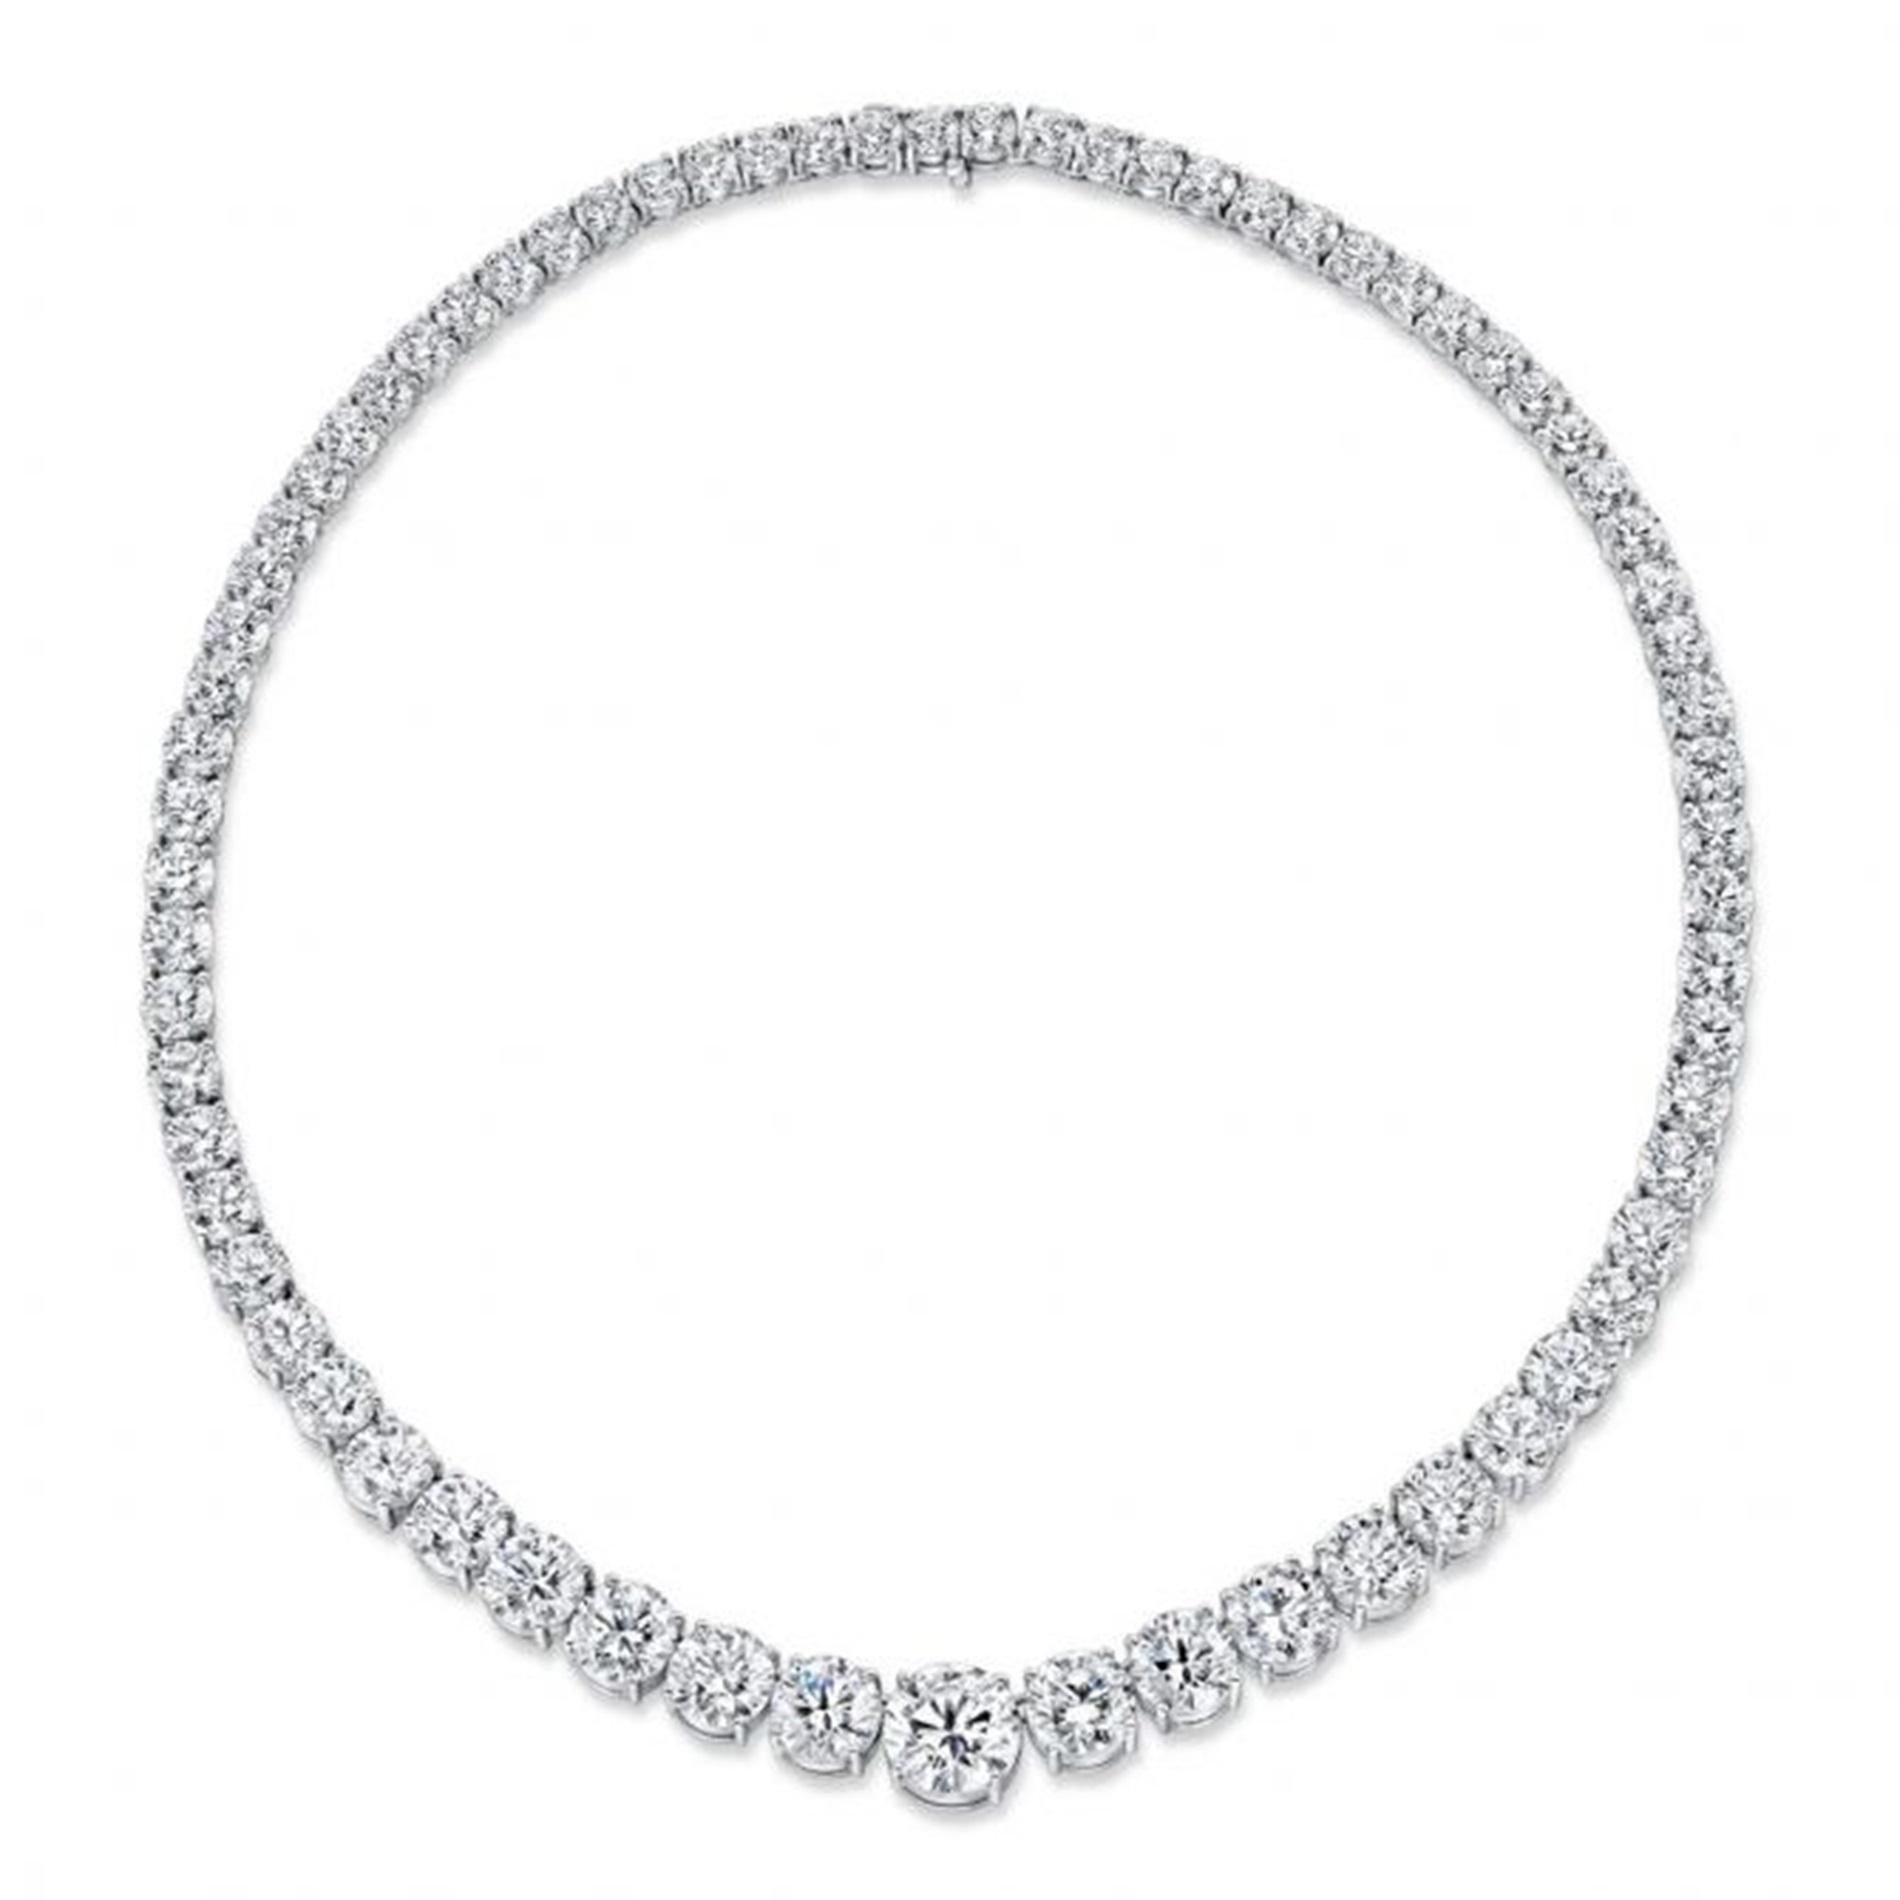 Behold the epitome of luxury and refinement with our mesmerizing 2.00 carat center FG FL-VS Riviera Necklace. Crafted to perfection, this masterpiece boasts a total carat weight of 29 carat set in radiant platinum. 

With a captivating 16.00-inch